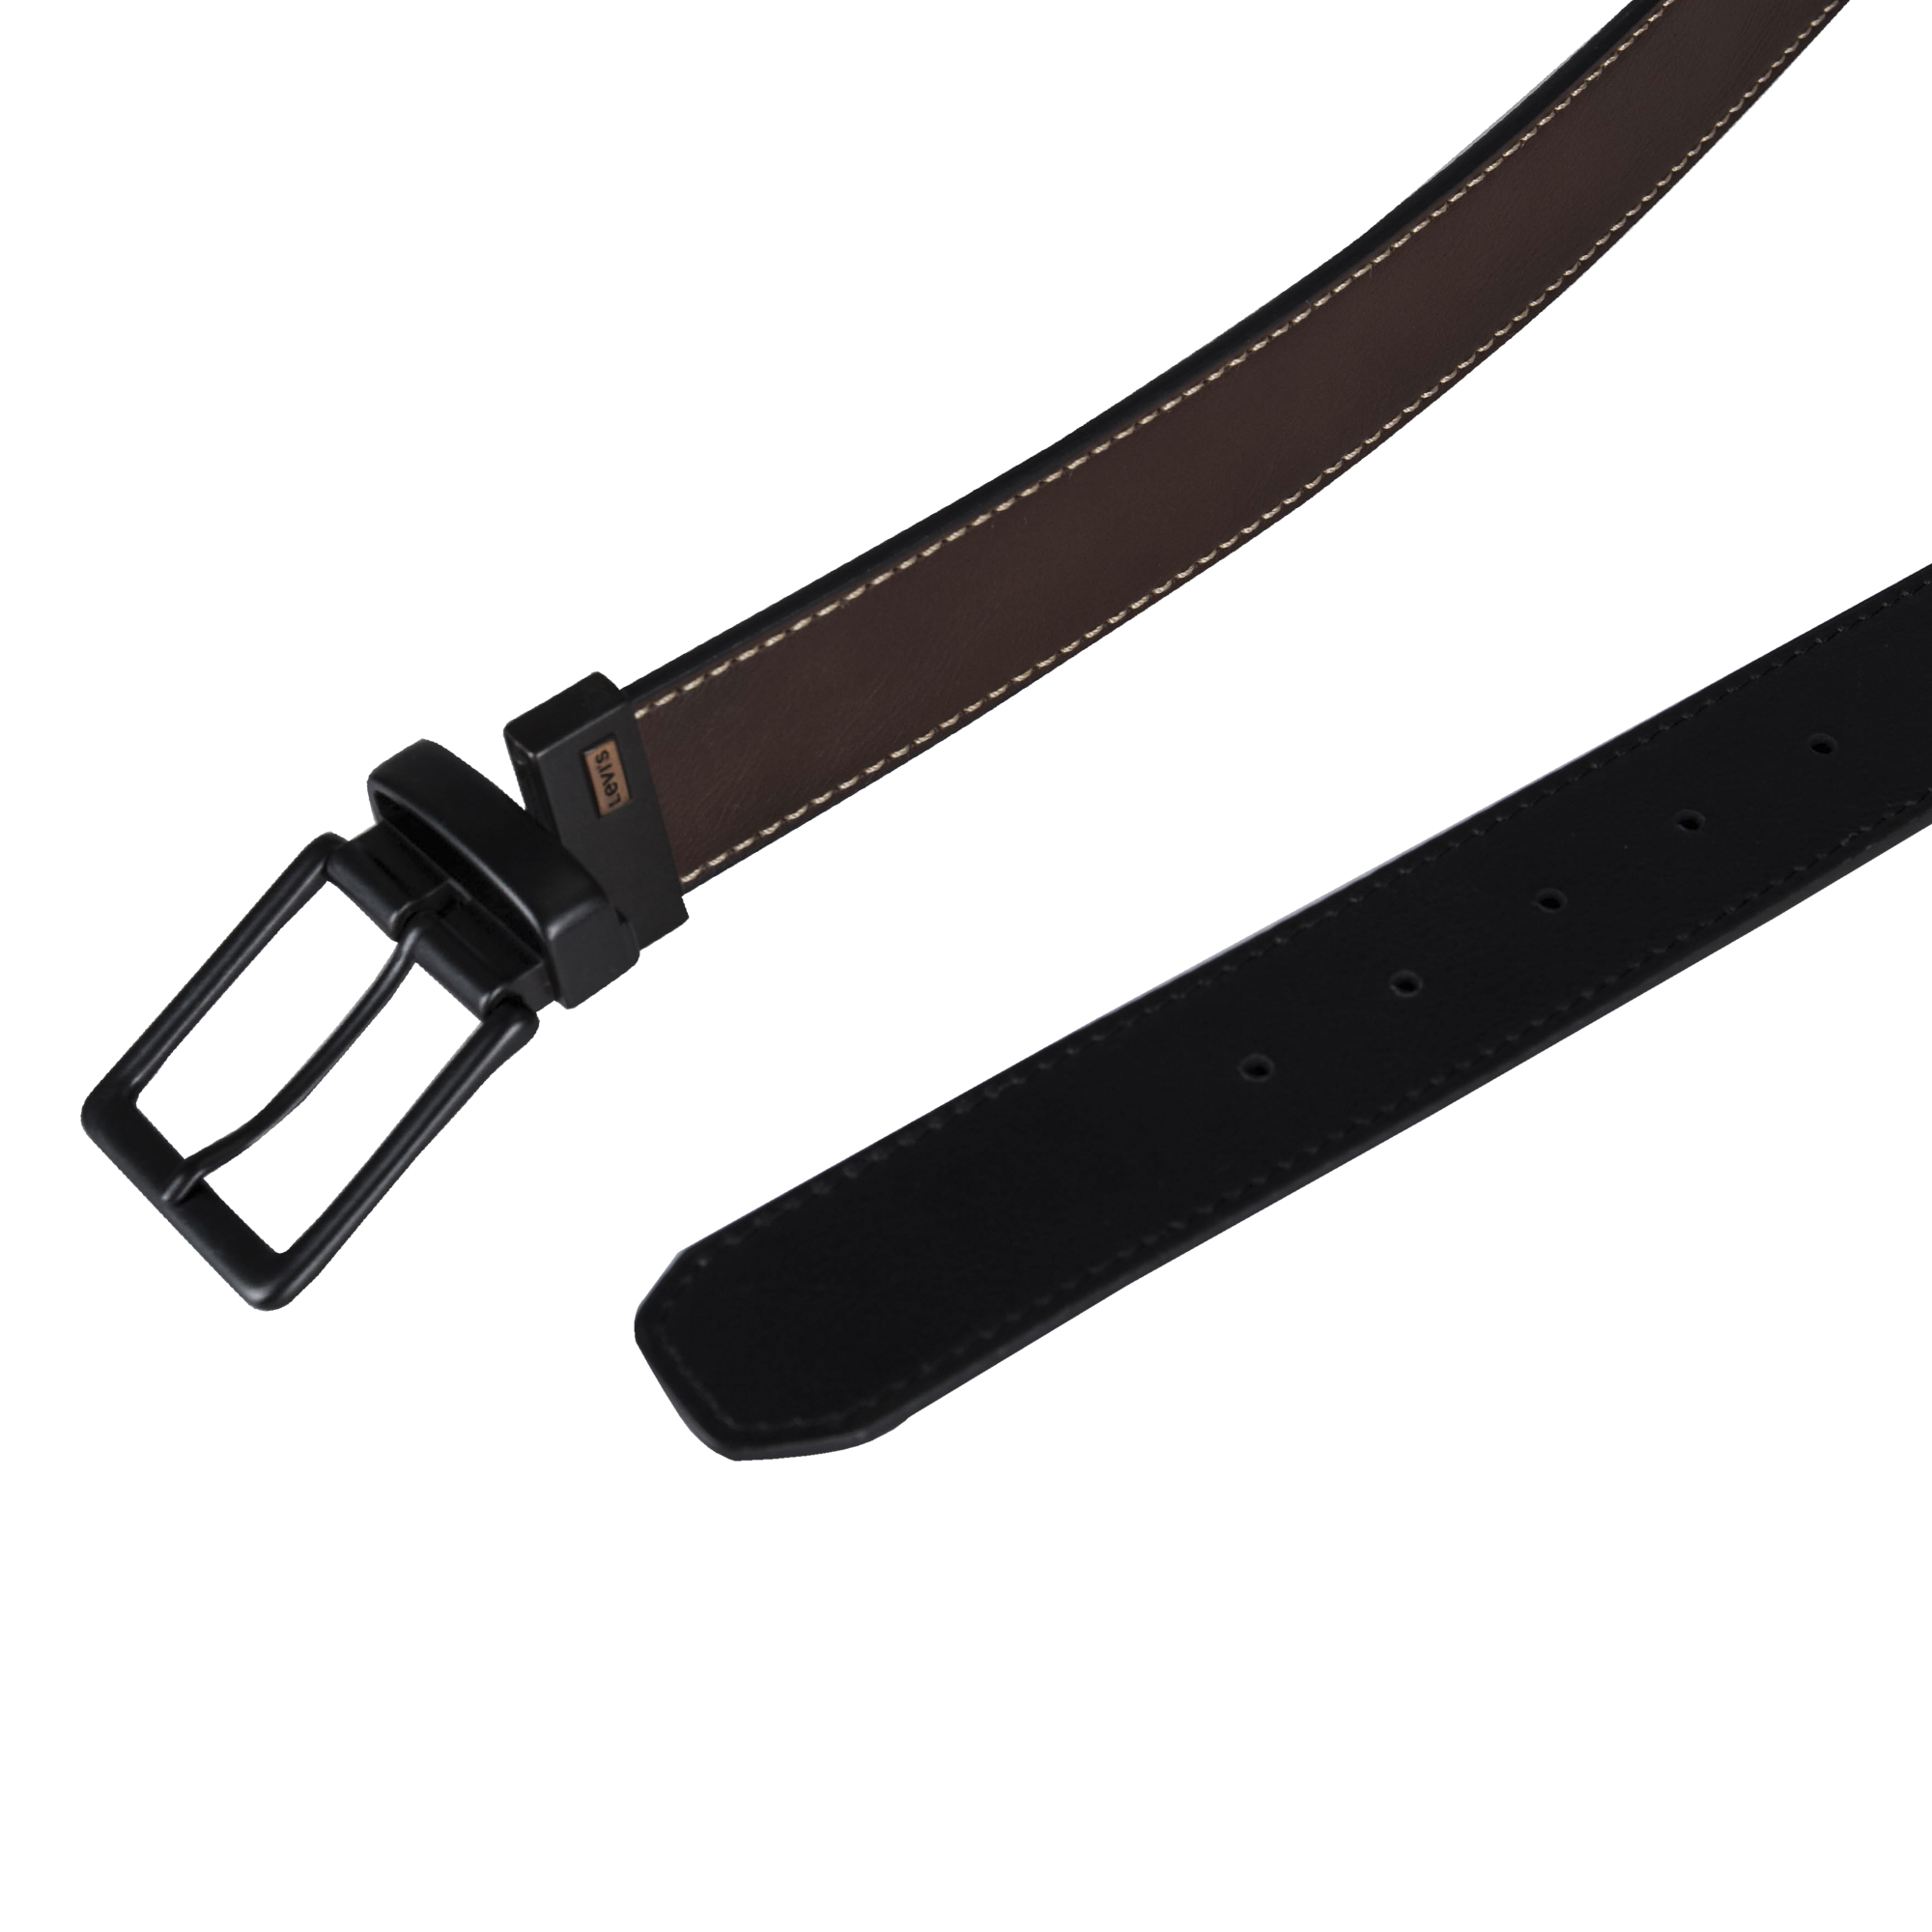 Levi's Men's Two-in-One Reversible Casual Jean Belt - image 4 of 7